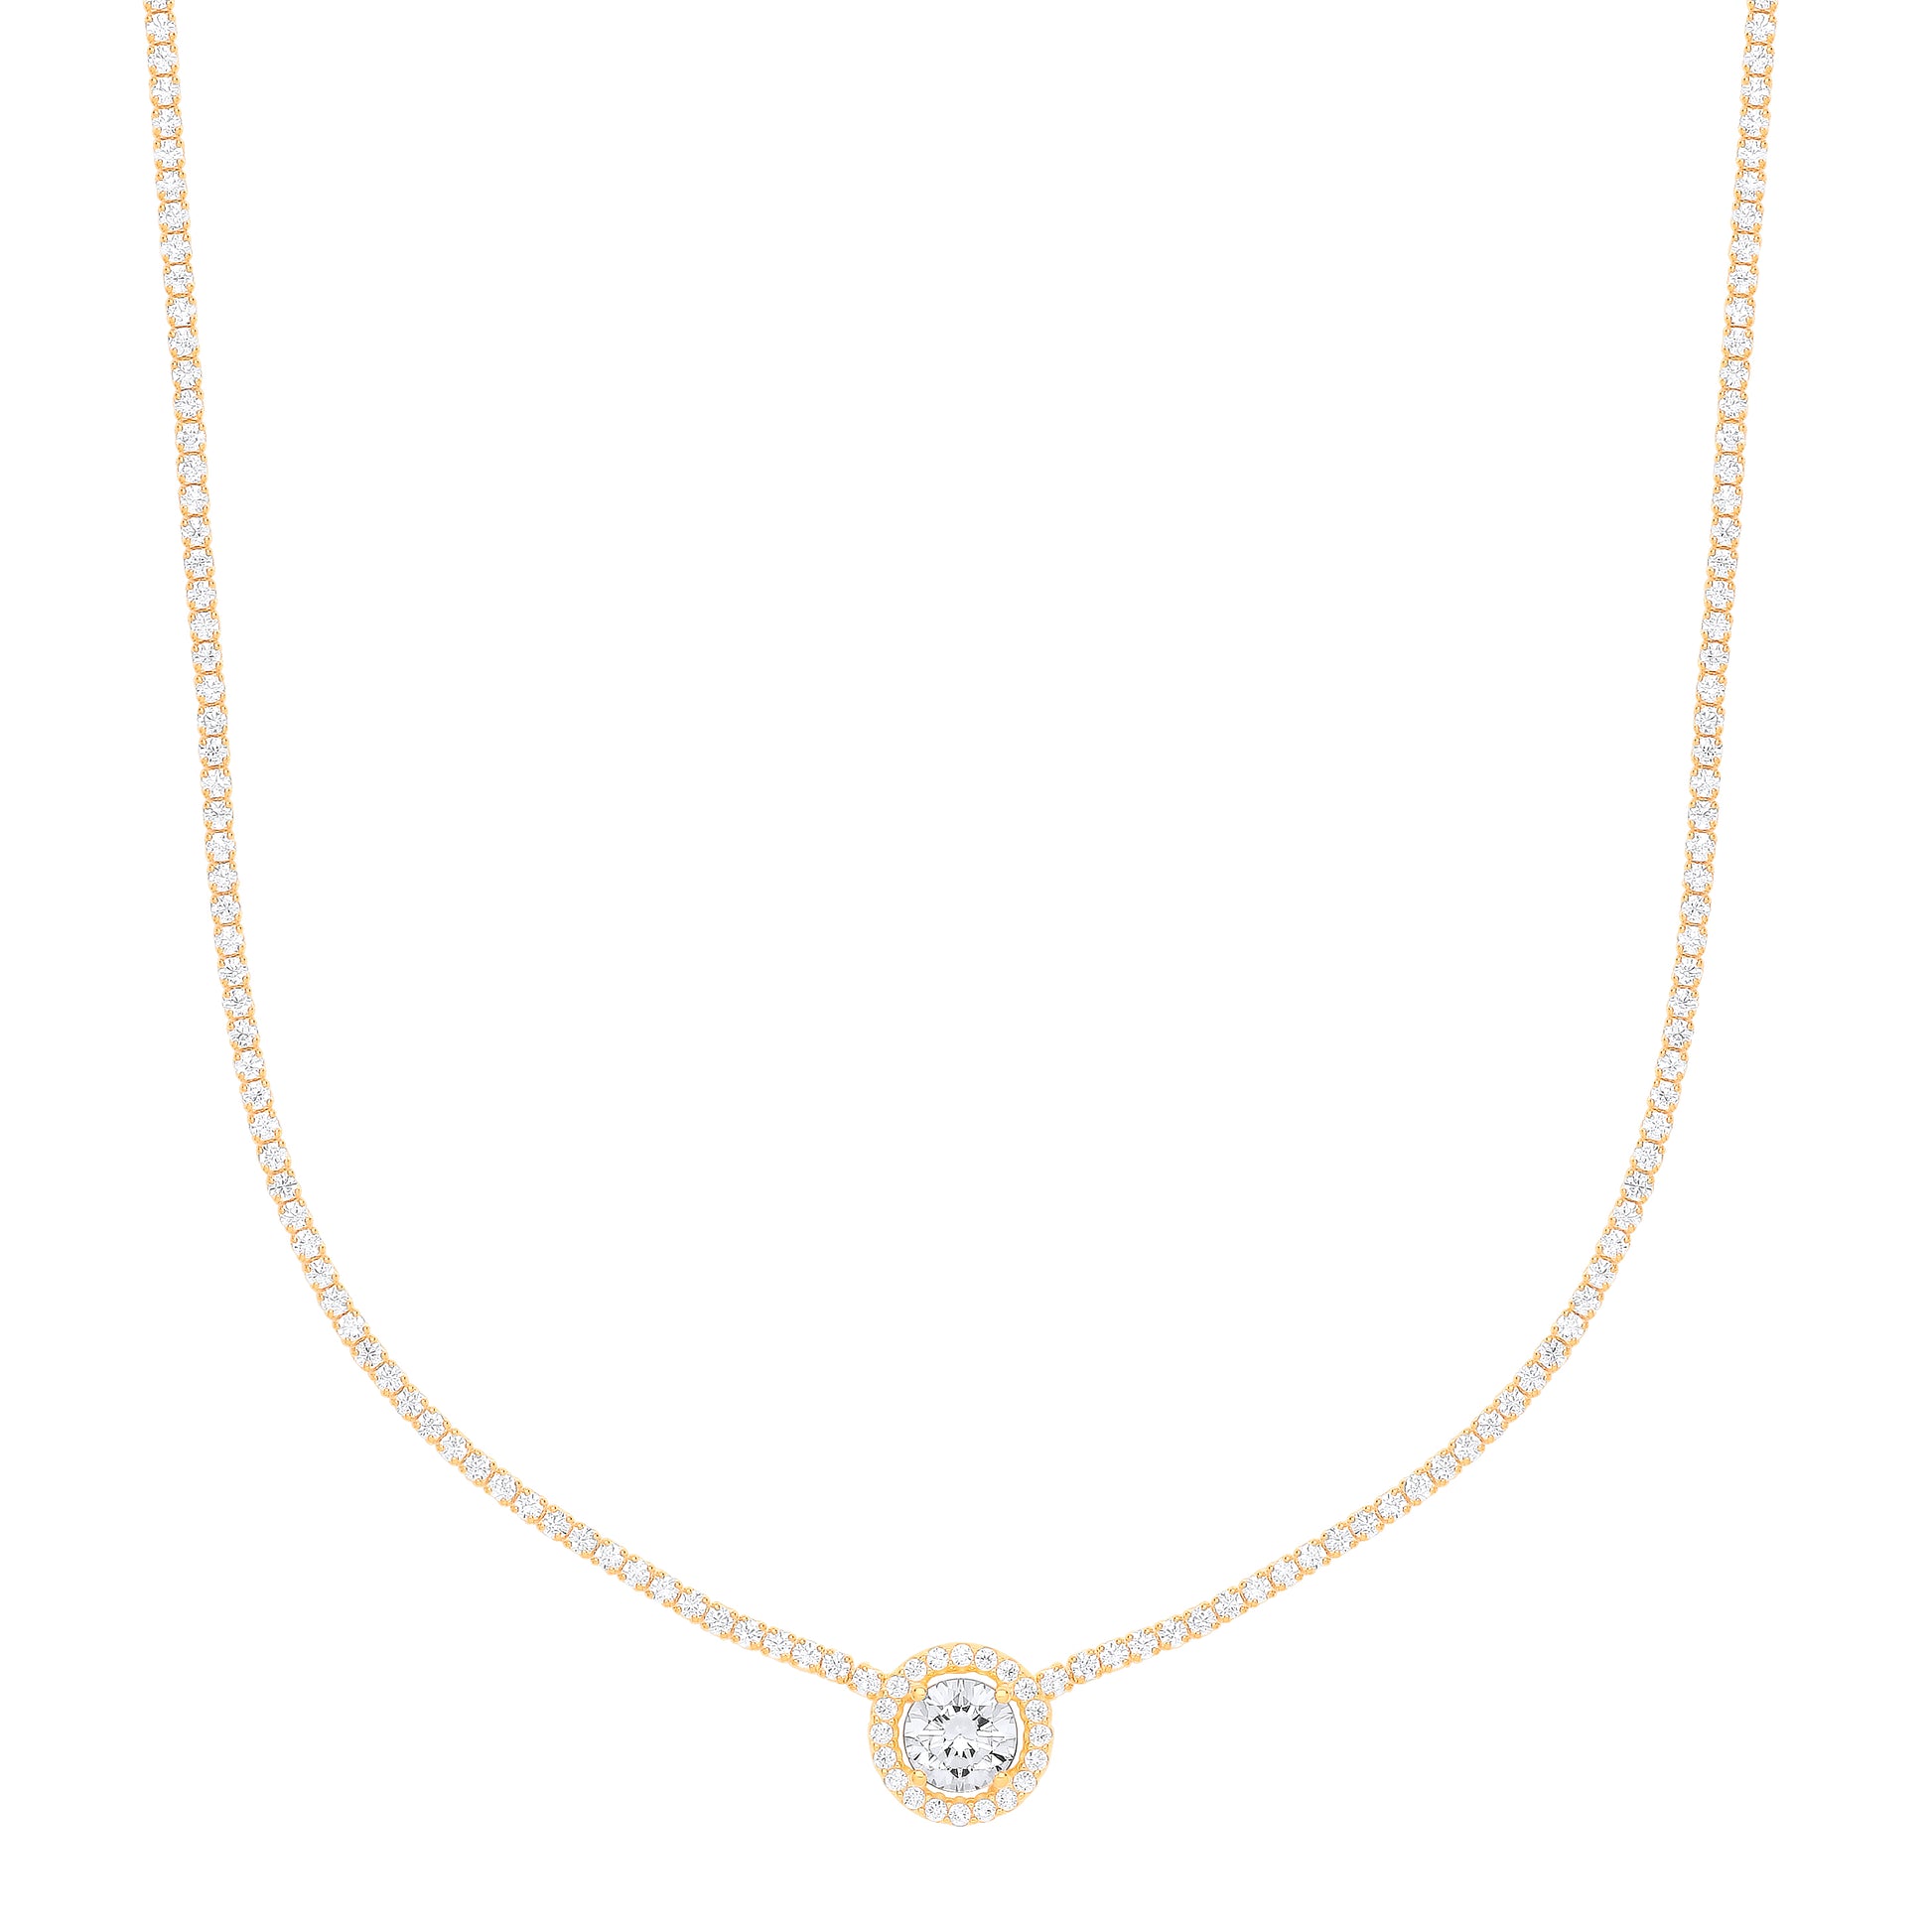 Gilded Silver  Round Solitaire Halo Cluster Tennis Necklace - GVK402